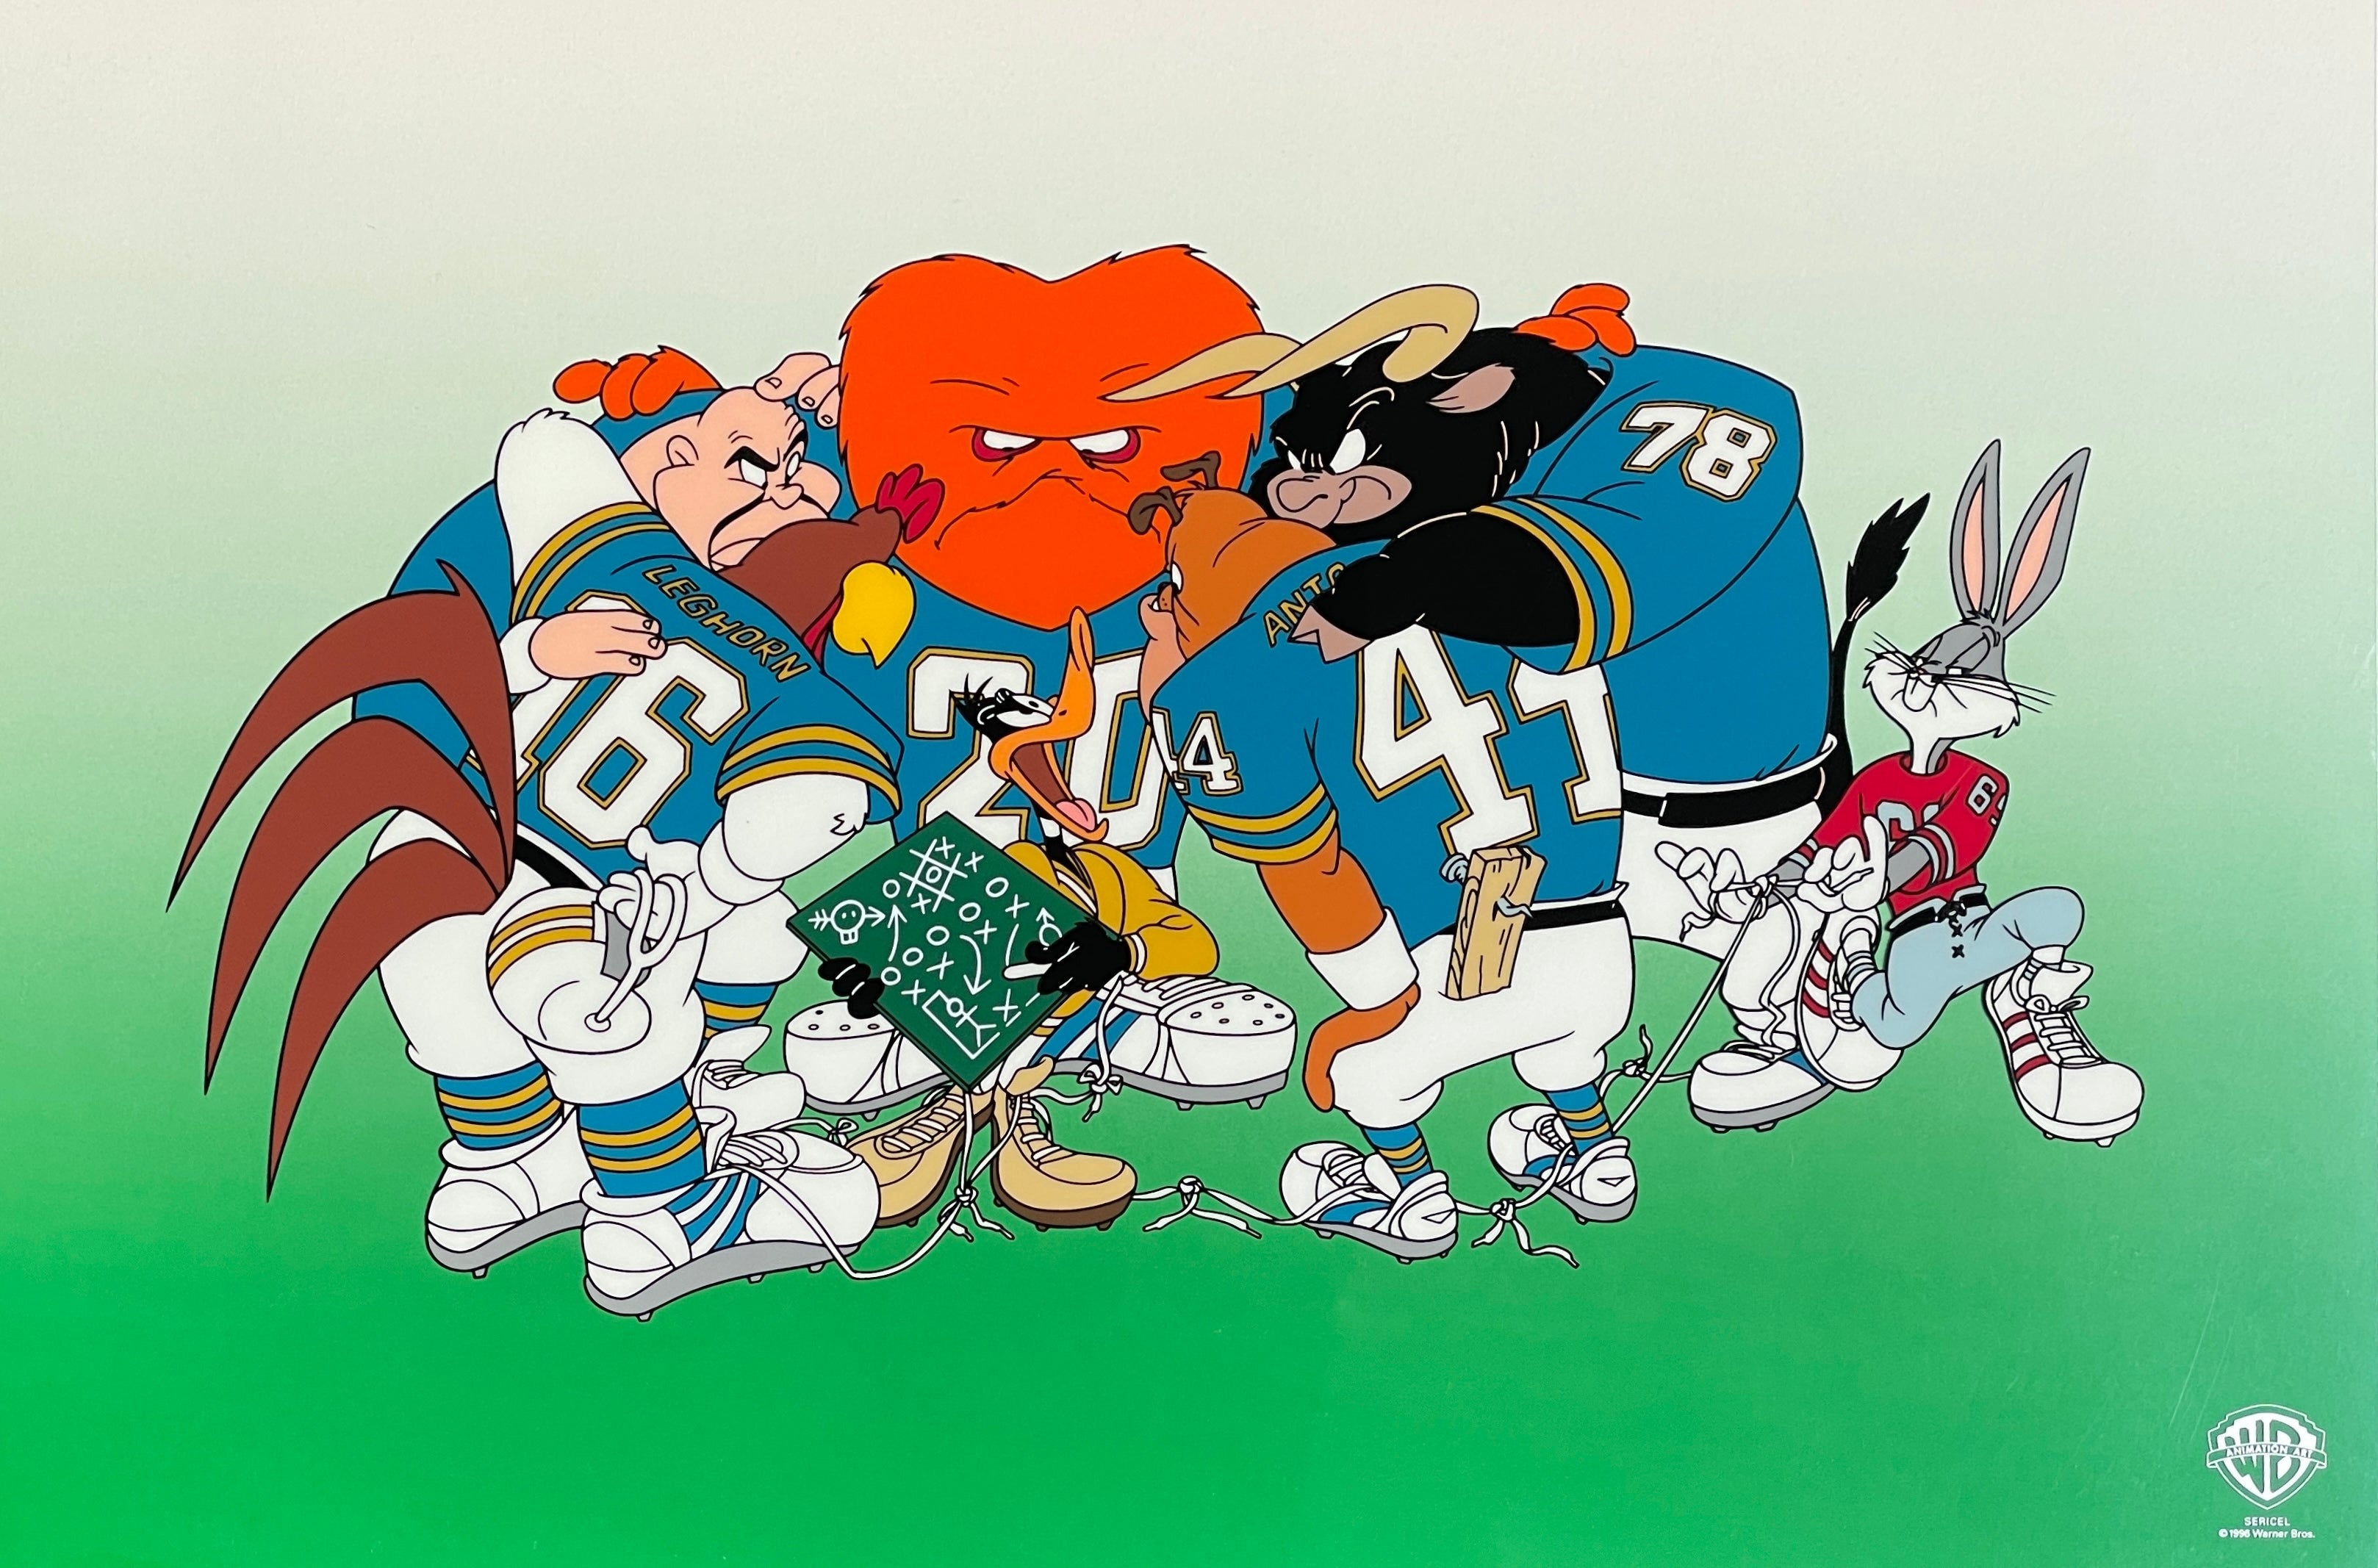 Daffy has the game plan down, and the Looney Tunes are ready to score in this image. Of course, Bugs has another idea entirely…